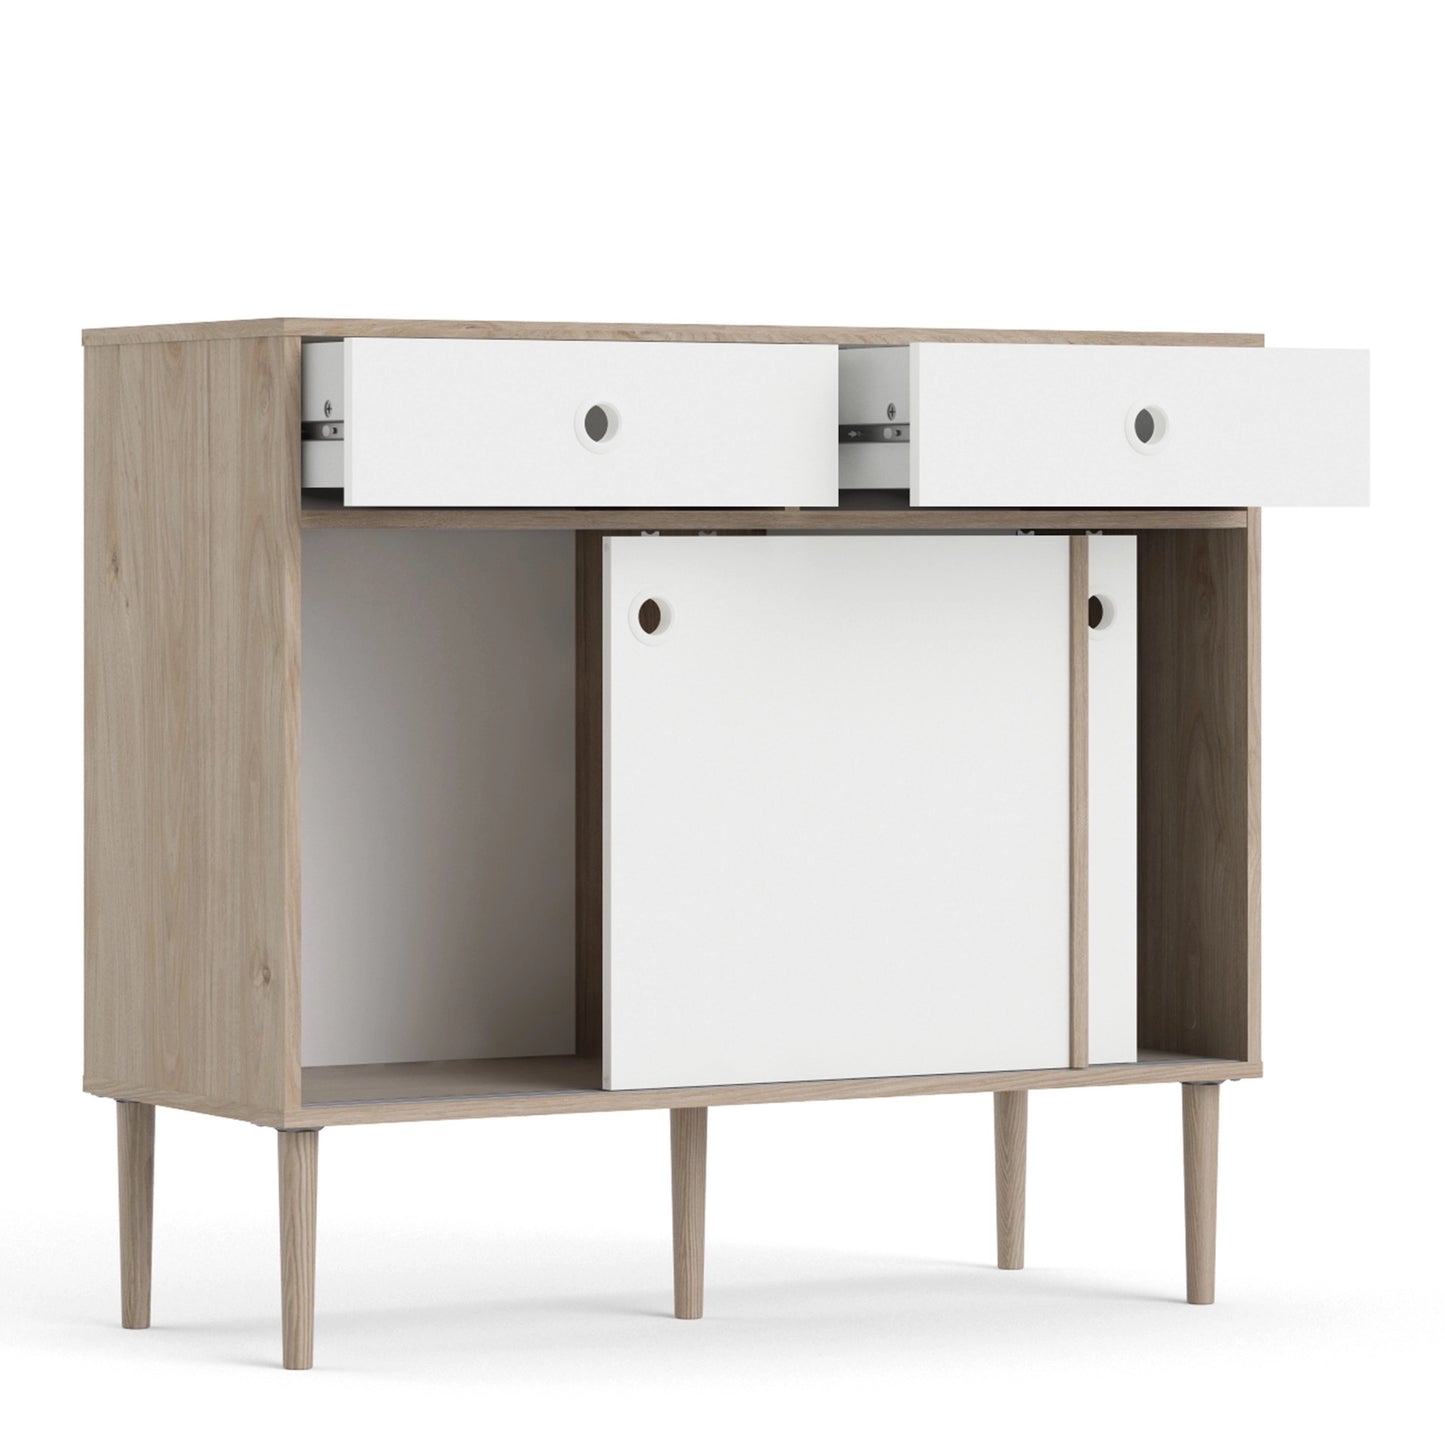 Furniture To Go Rome Sideboard 2 Sliding Doors + 2 Drawers in Jackson Hickory Oak with Matt White